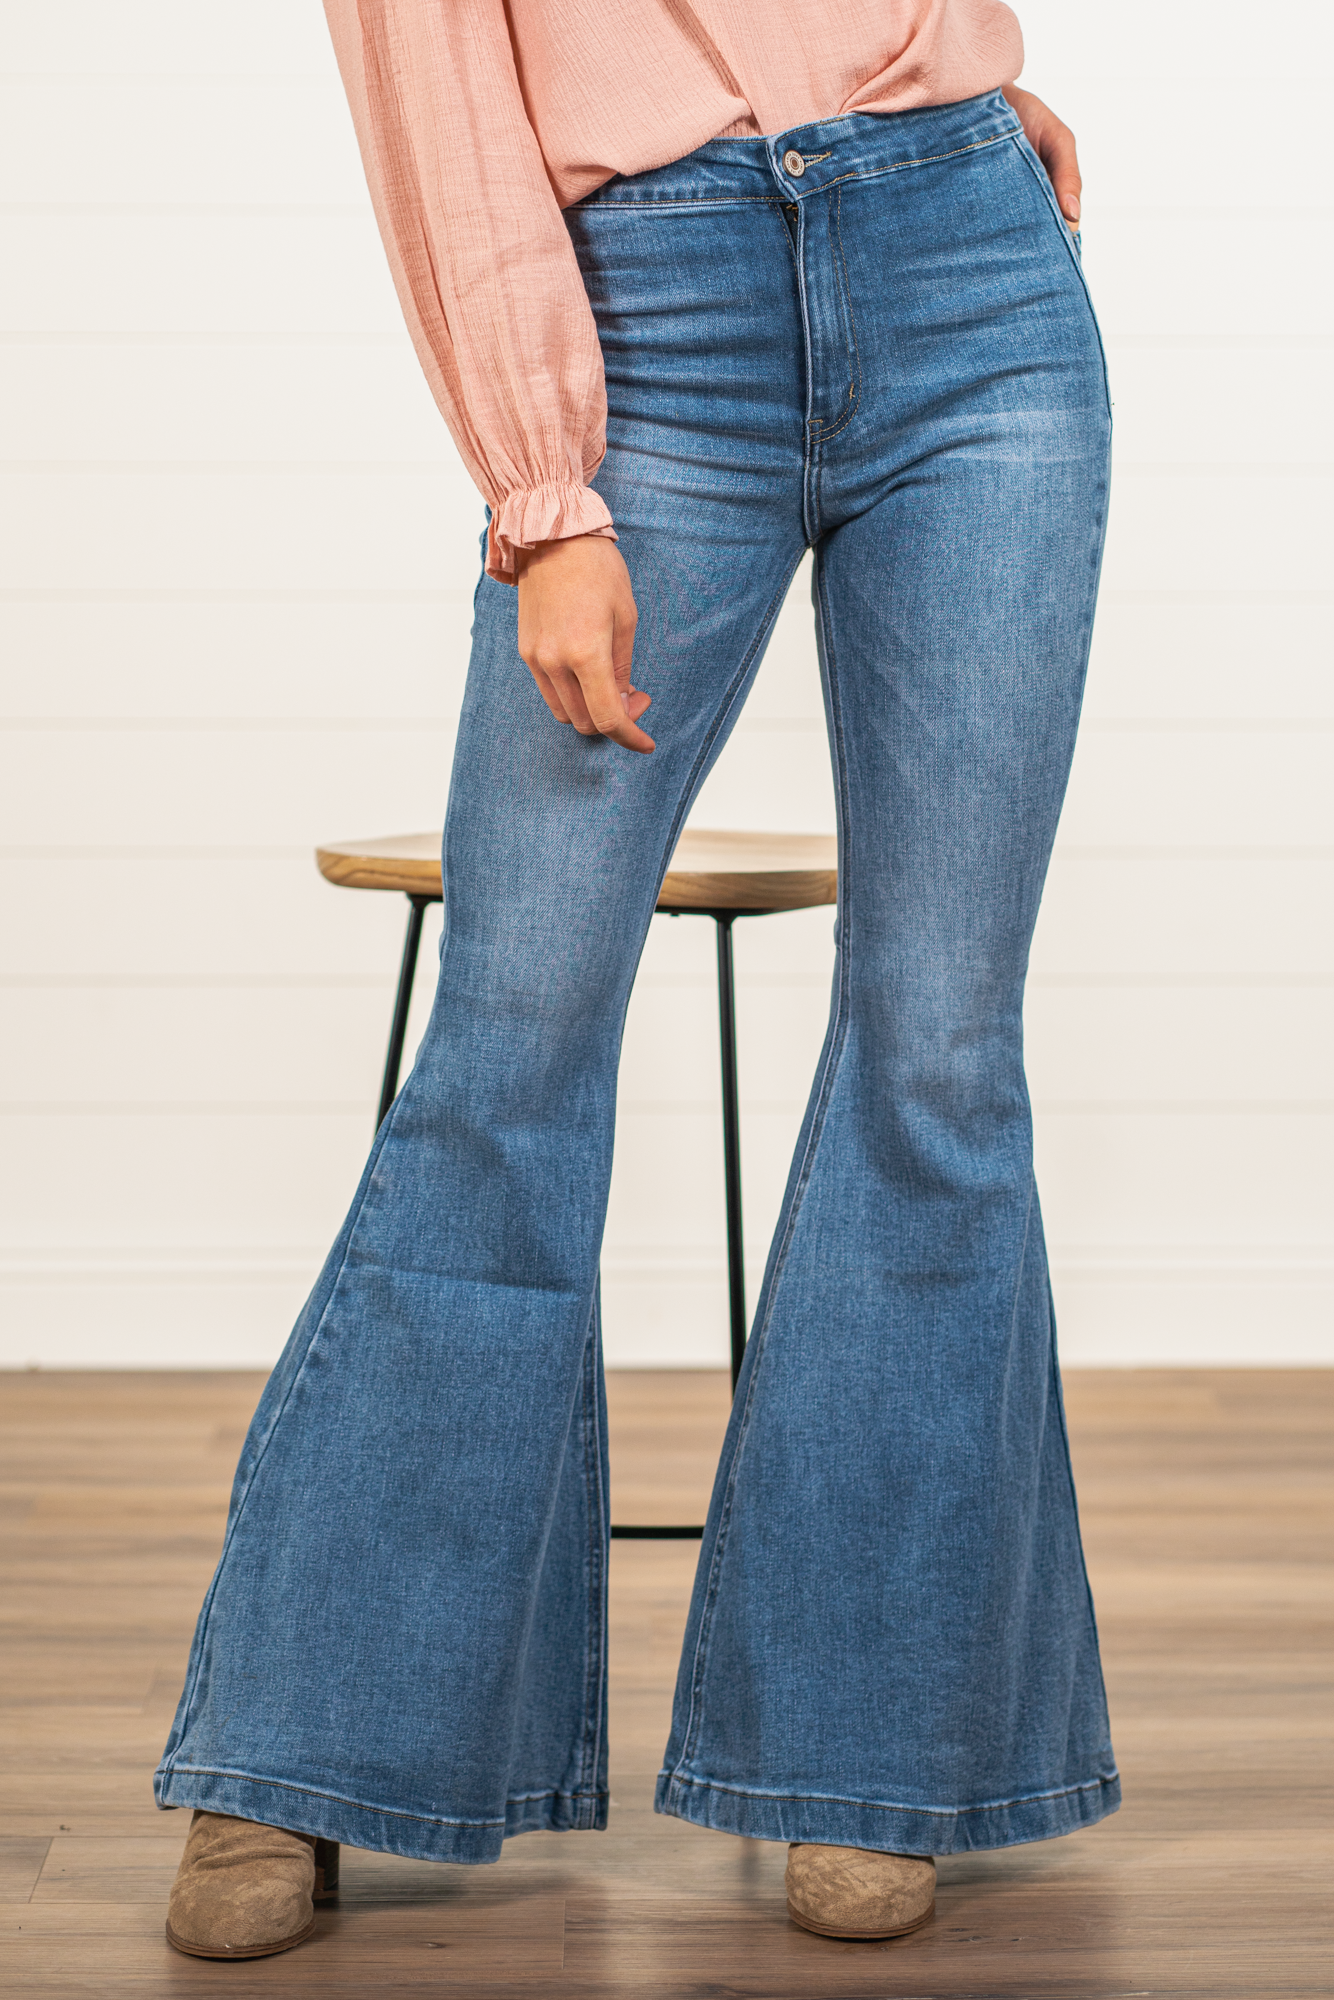 KanCan Jeans  KanCan Stretch Leve: Stretchy   Flare, 34" Inseam* High Rise, 11" Front Rise* Dark Blue Wash  93% Cotton, 5% T400, 2% Spandex Fly: Zipper Style #: KC6247VMV2 Contact us for any additional measurements or sizing.  *Measured on the smallest size, measurements may vary by size.   